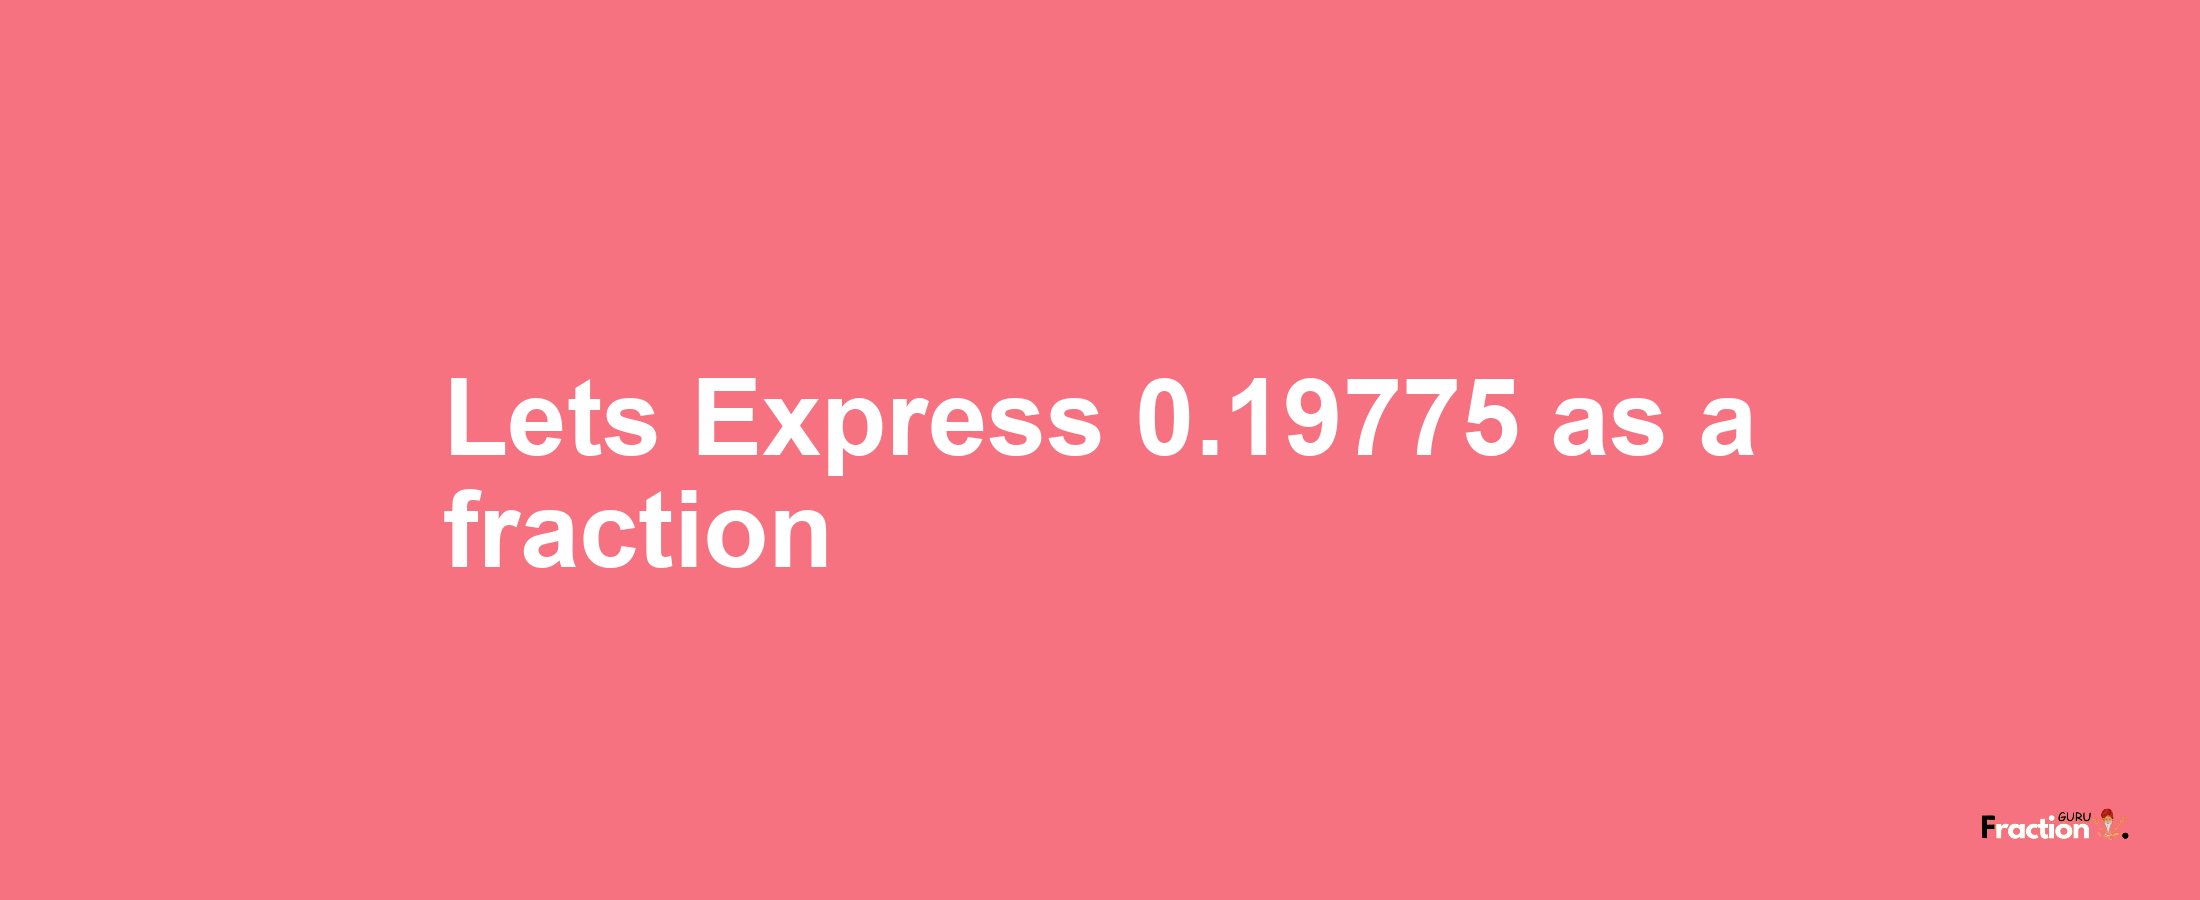 Lets Express 0.19775 as afraction